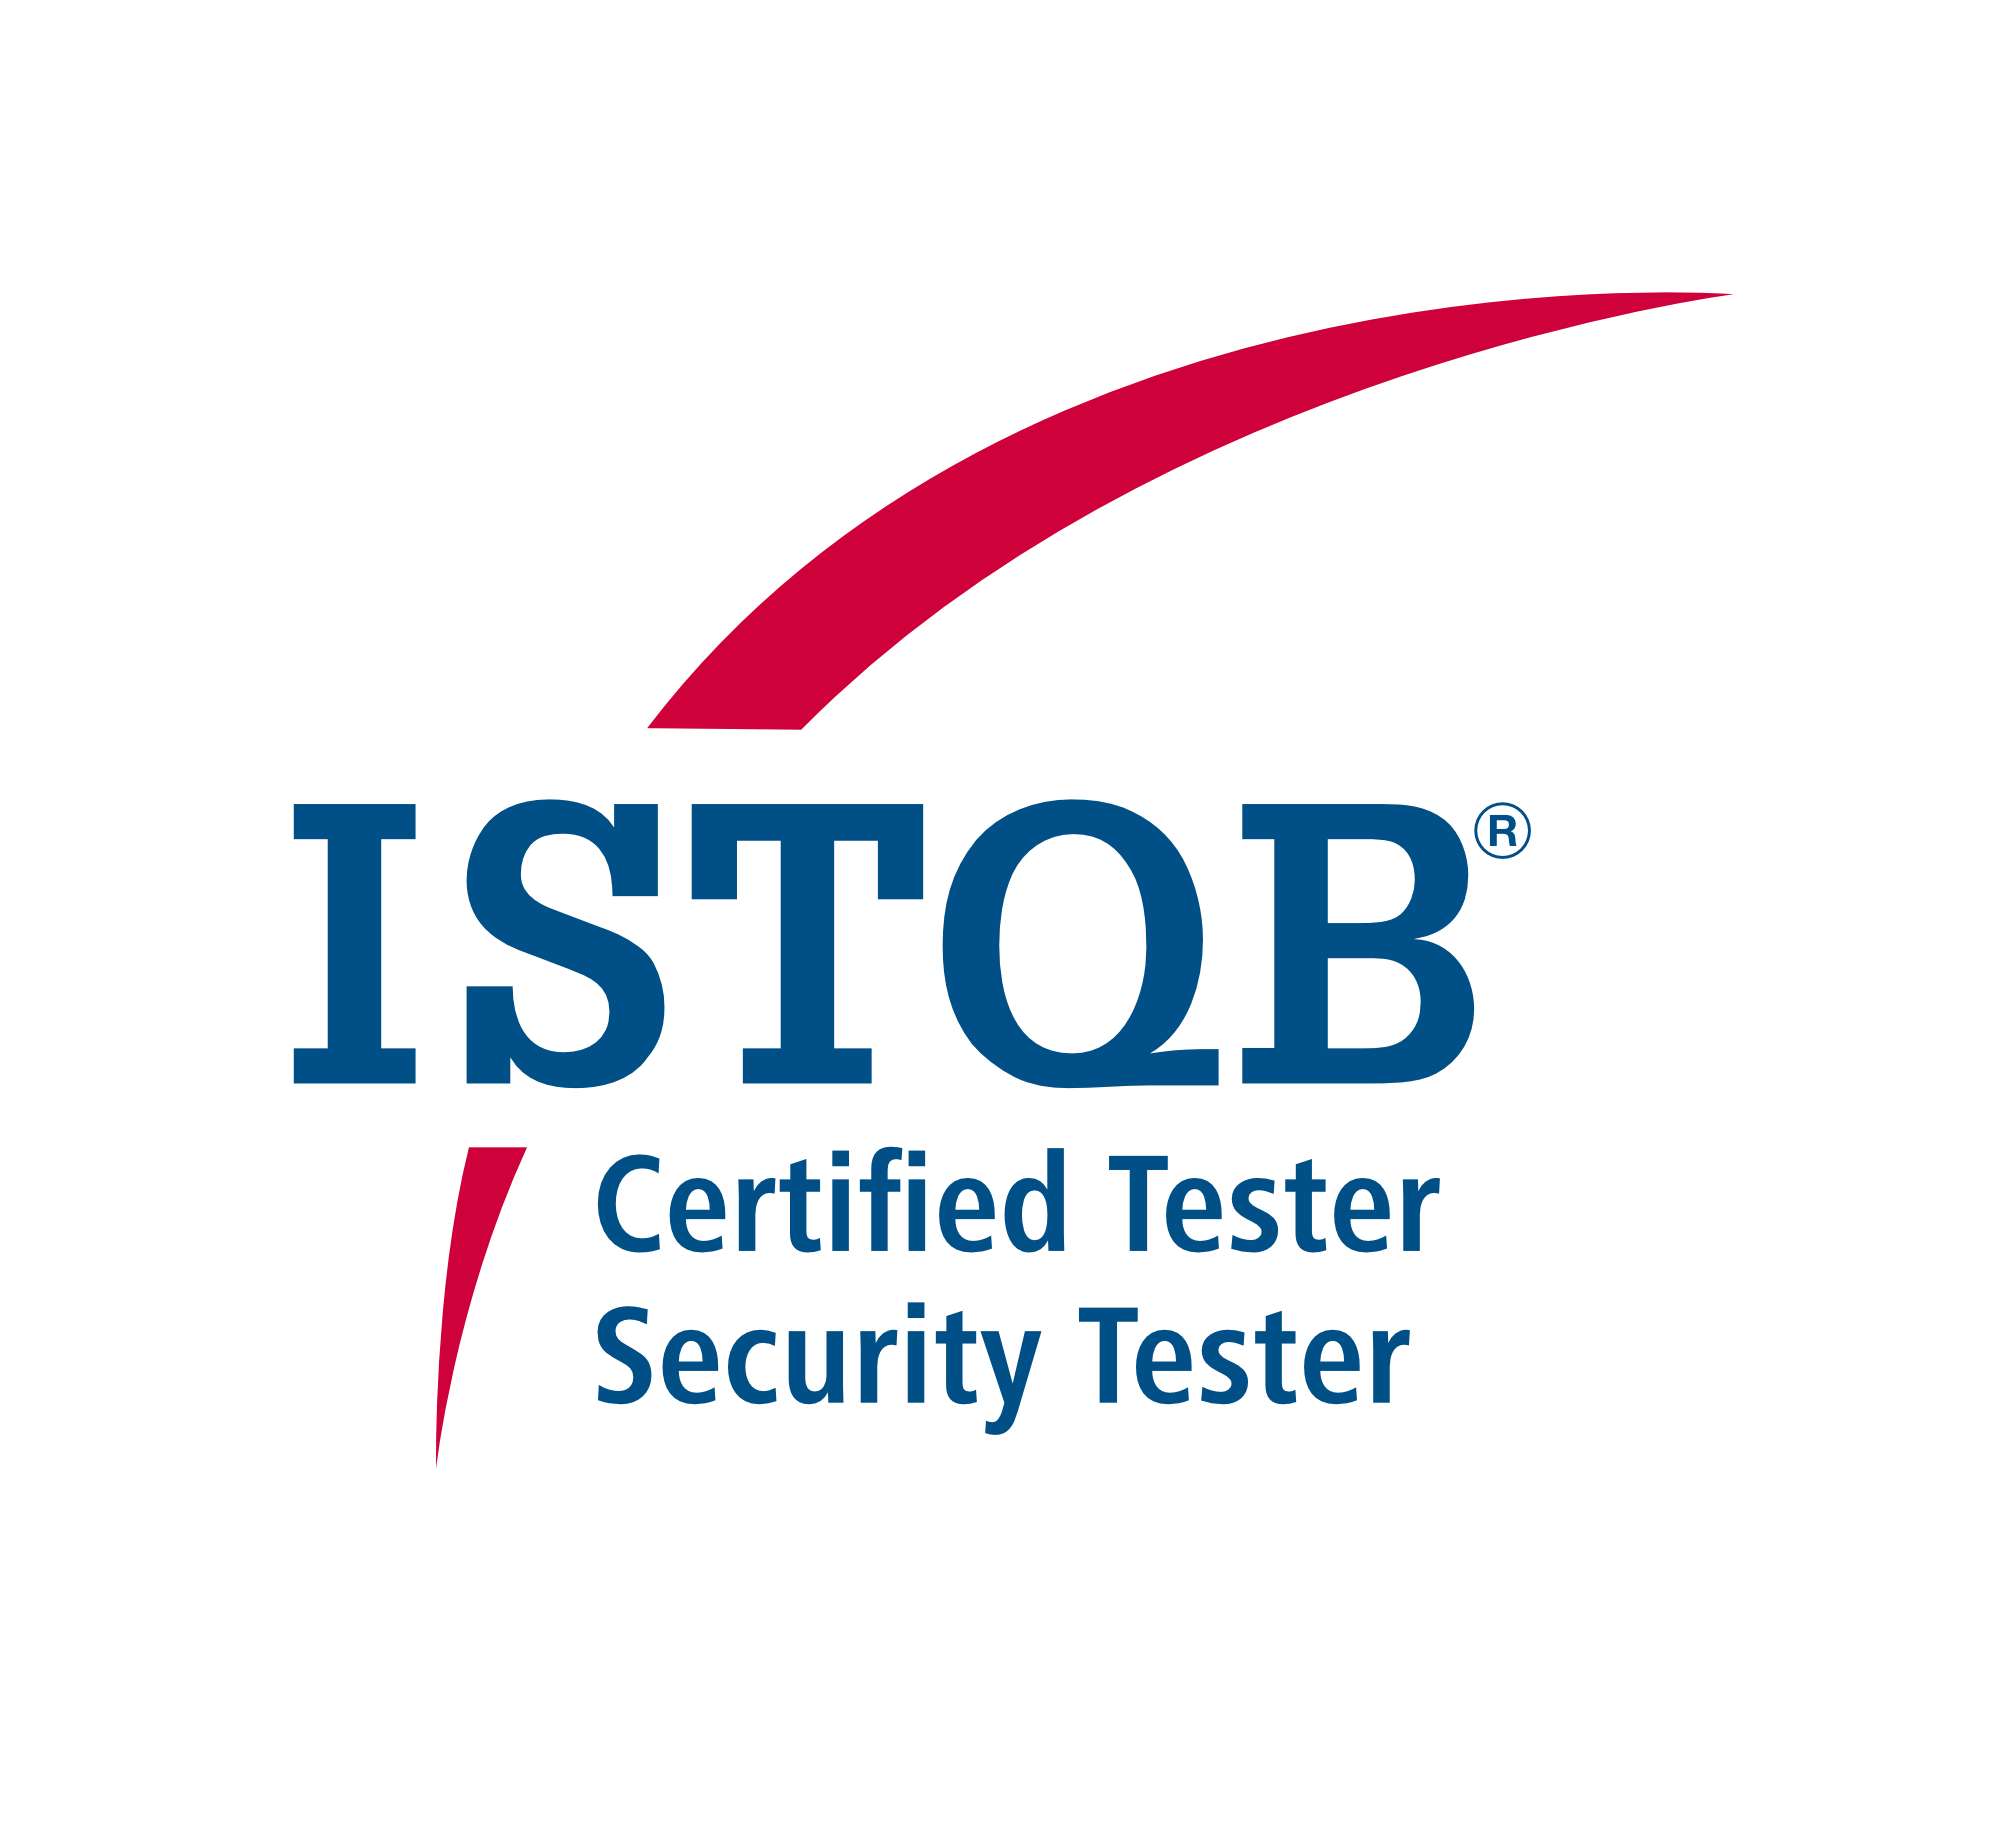 ISTQB Certified Tester - Security Tester (CT-SEC) badge